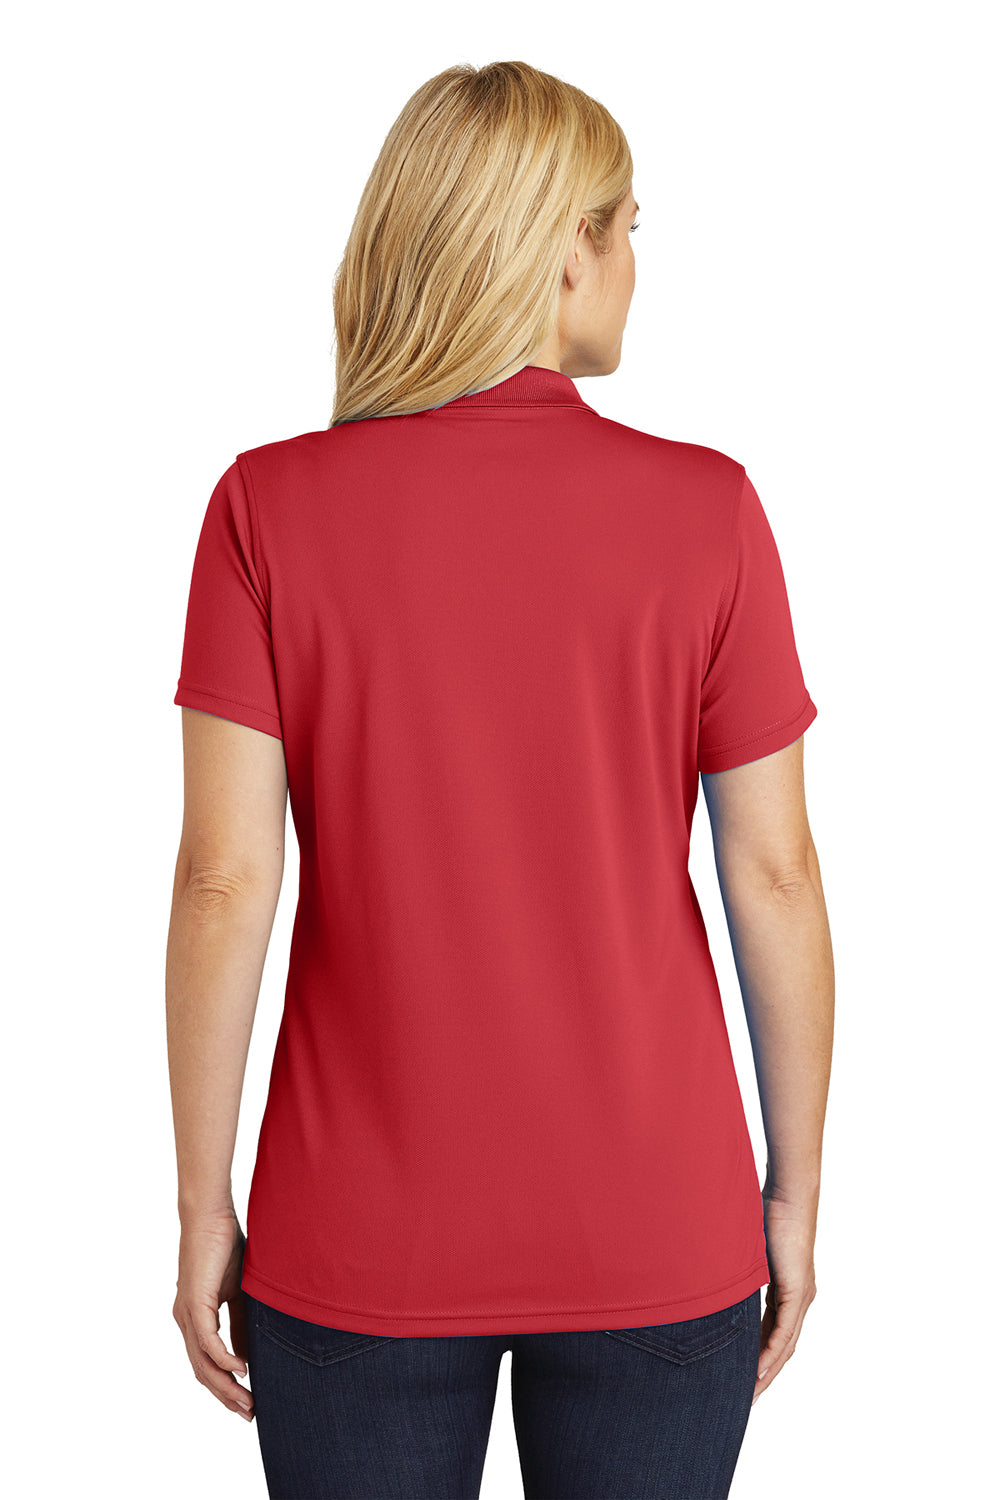 Port Authority LK110 Womens Dry Zone Moisture Wicking Short Sleeve Polo Shirt Red Back